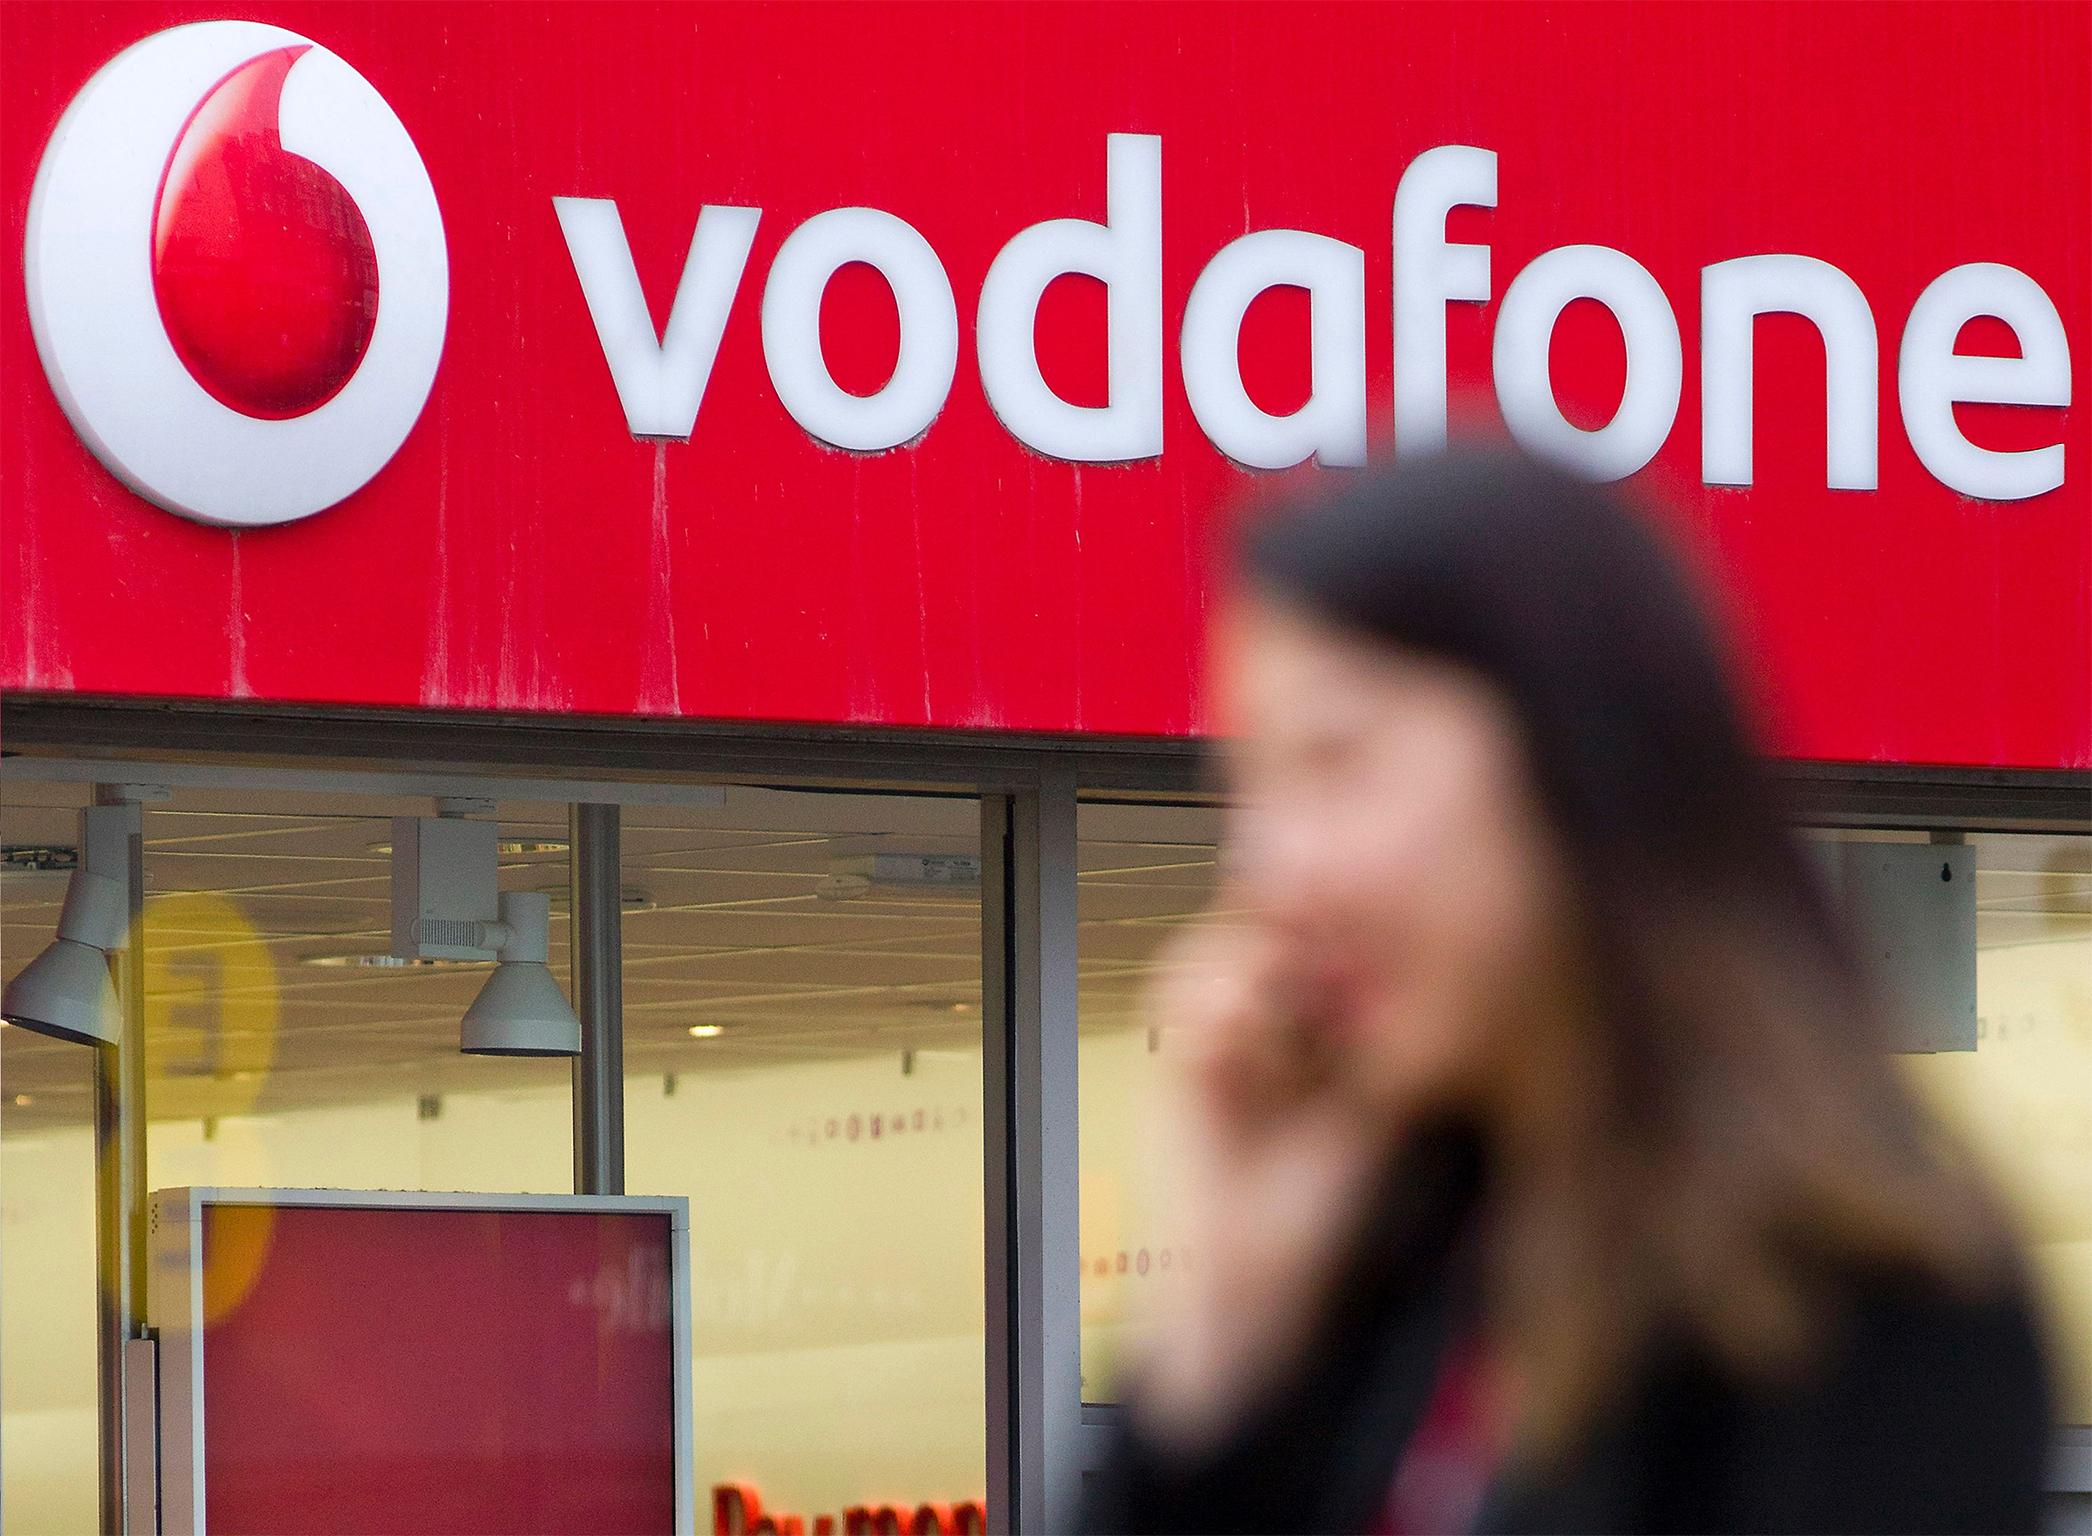 Vodafone CEO urges Britain to stay in EU to shape digital market